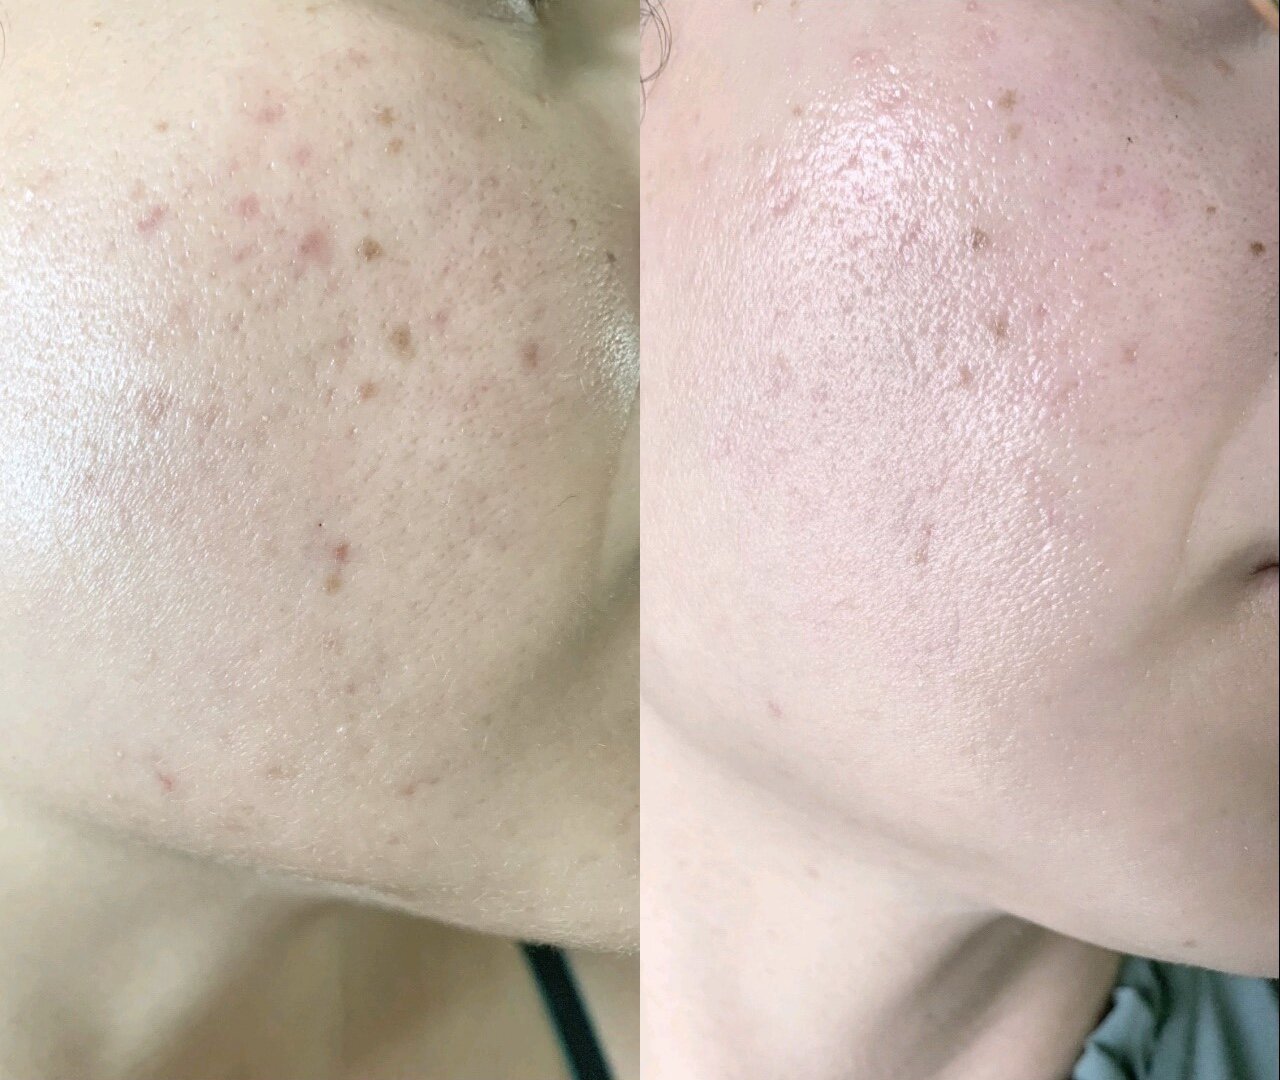 acne scarring or post inflammatory hyperpigmentation